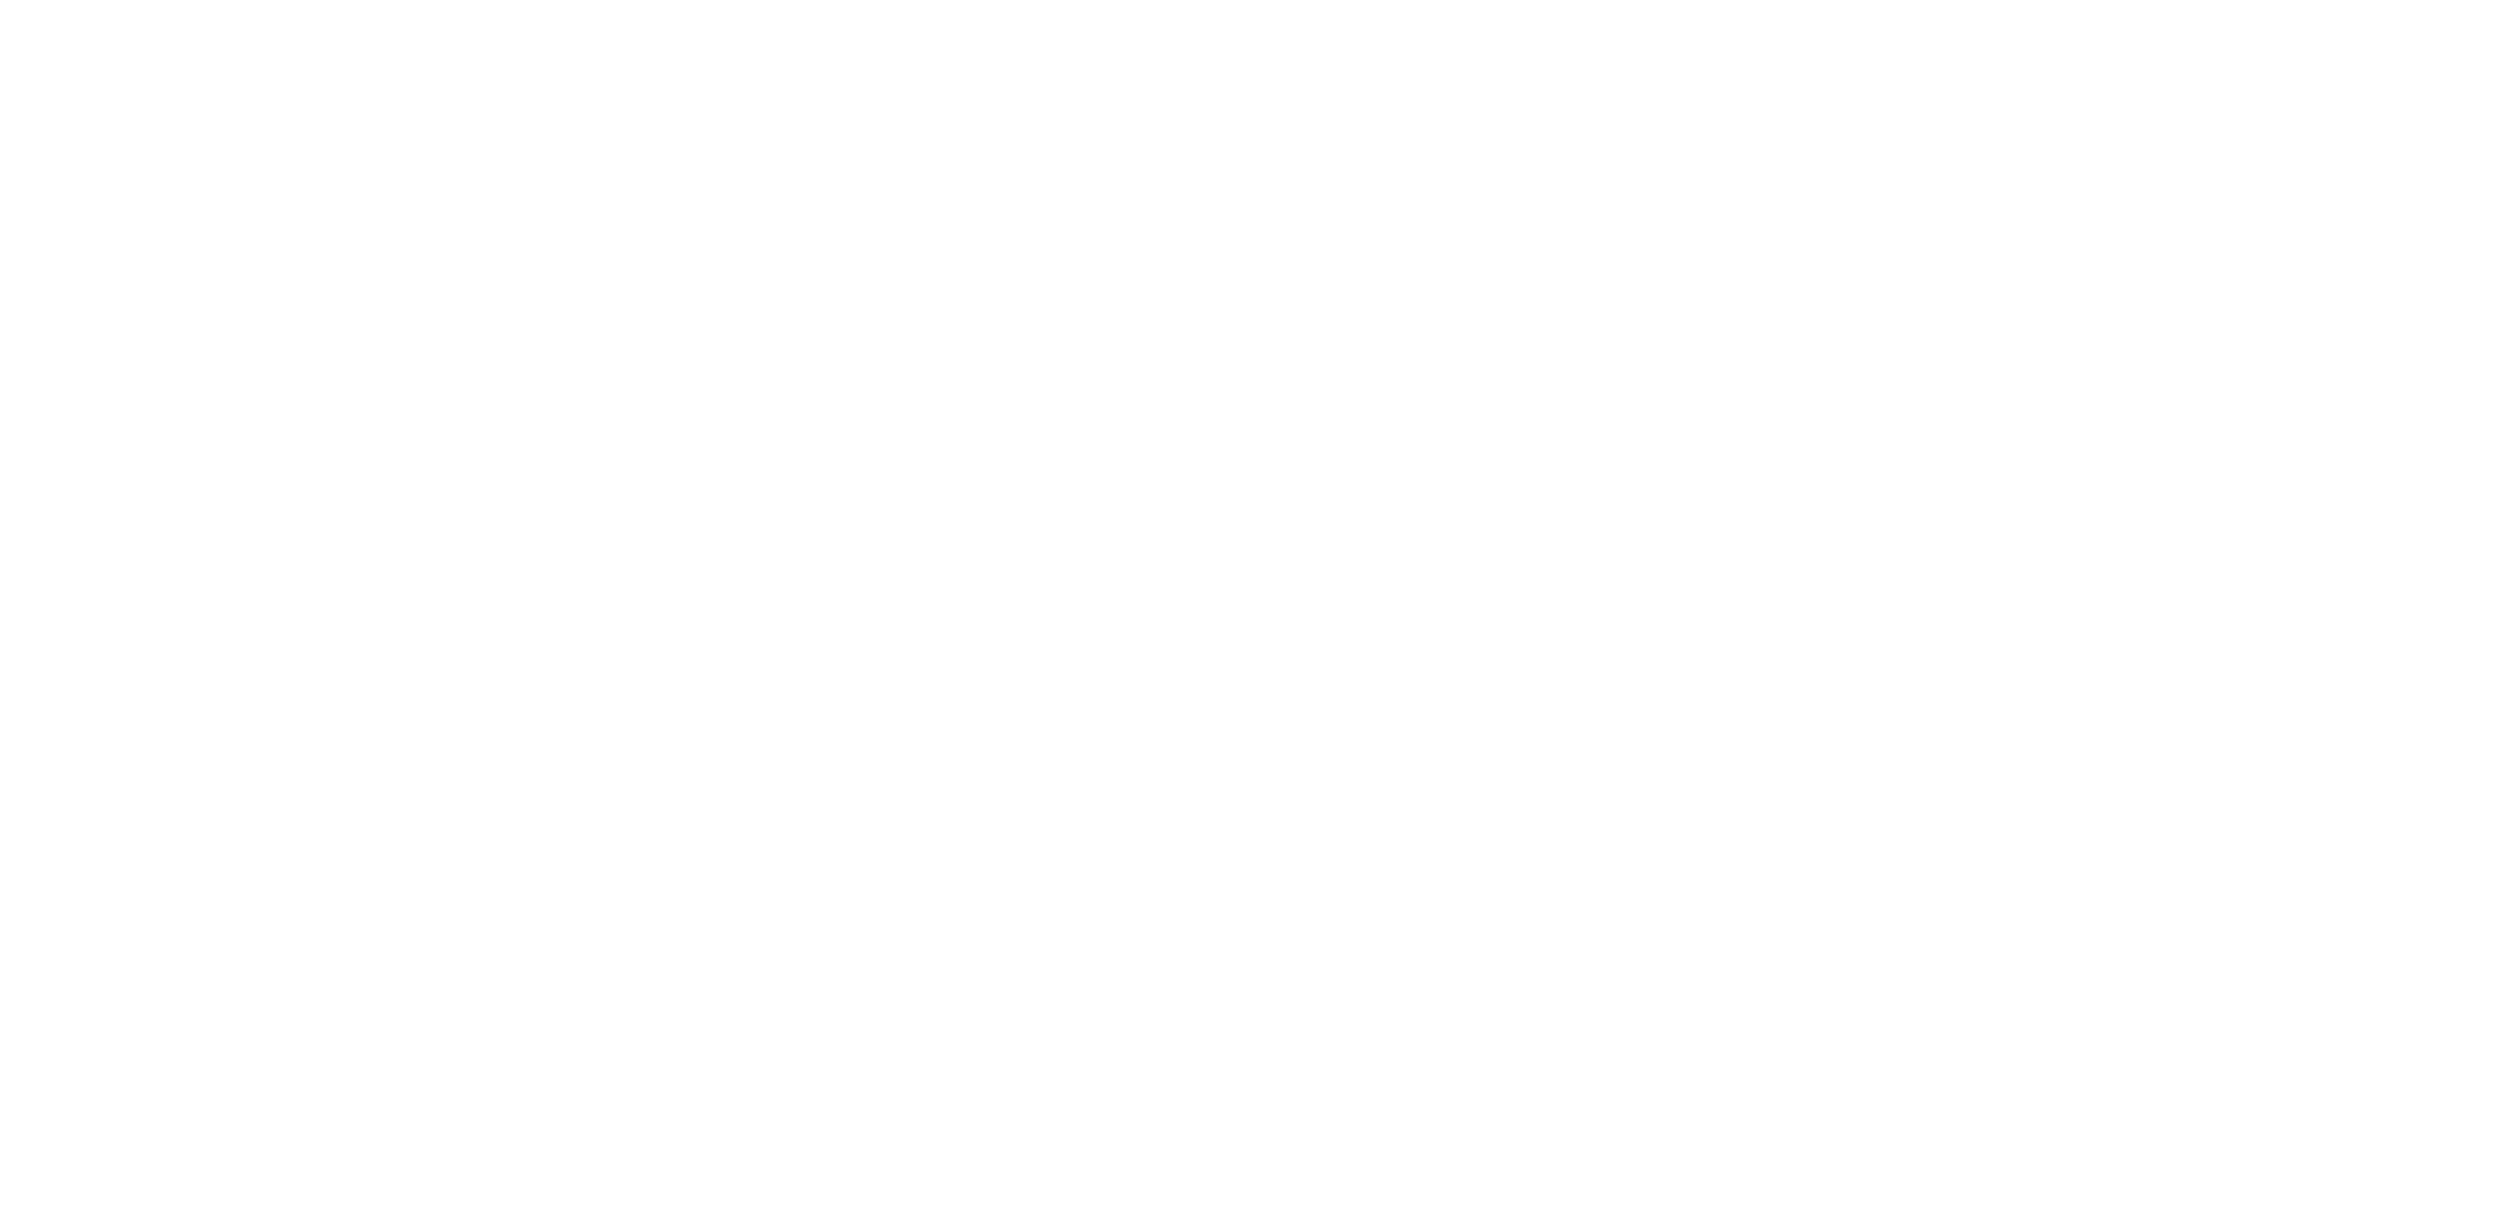 With Energy